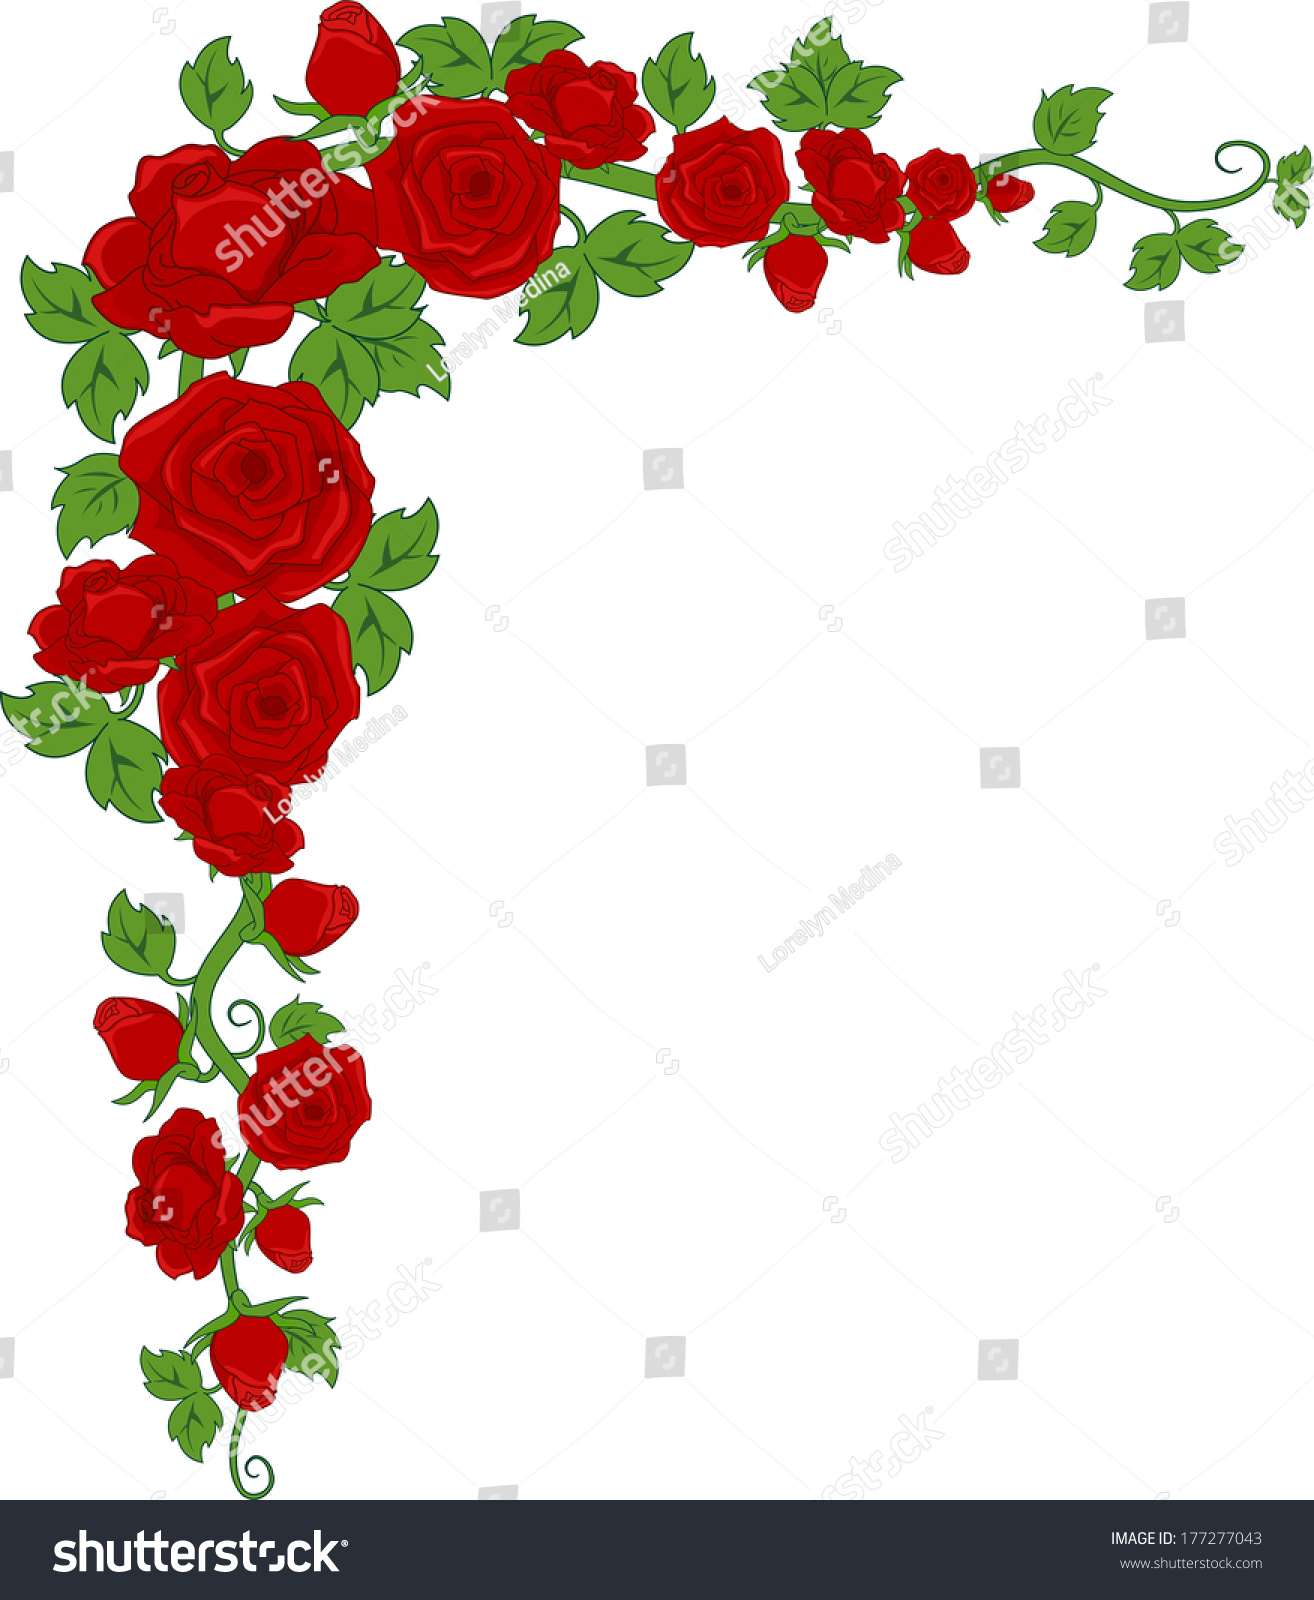 clipart red roses border - photo #36